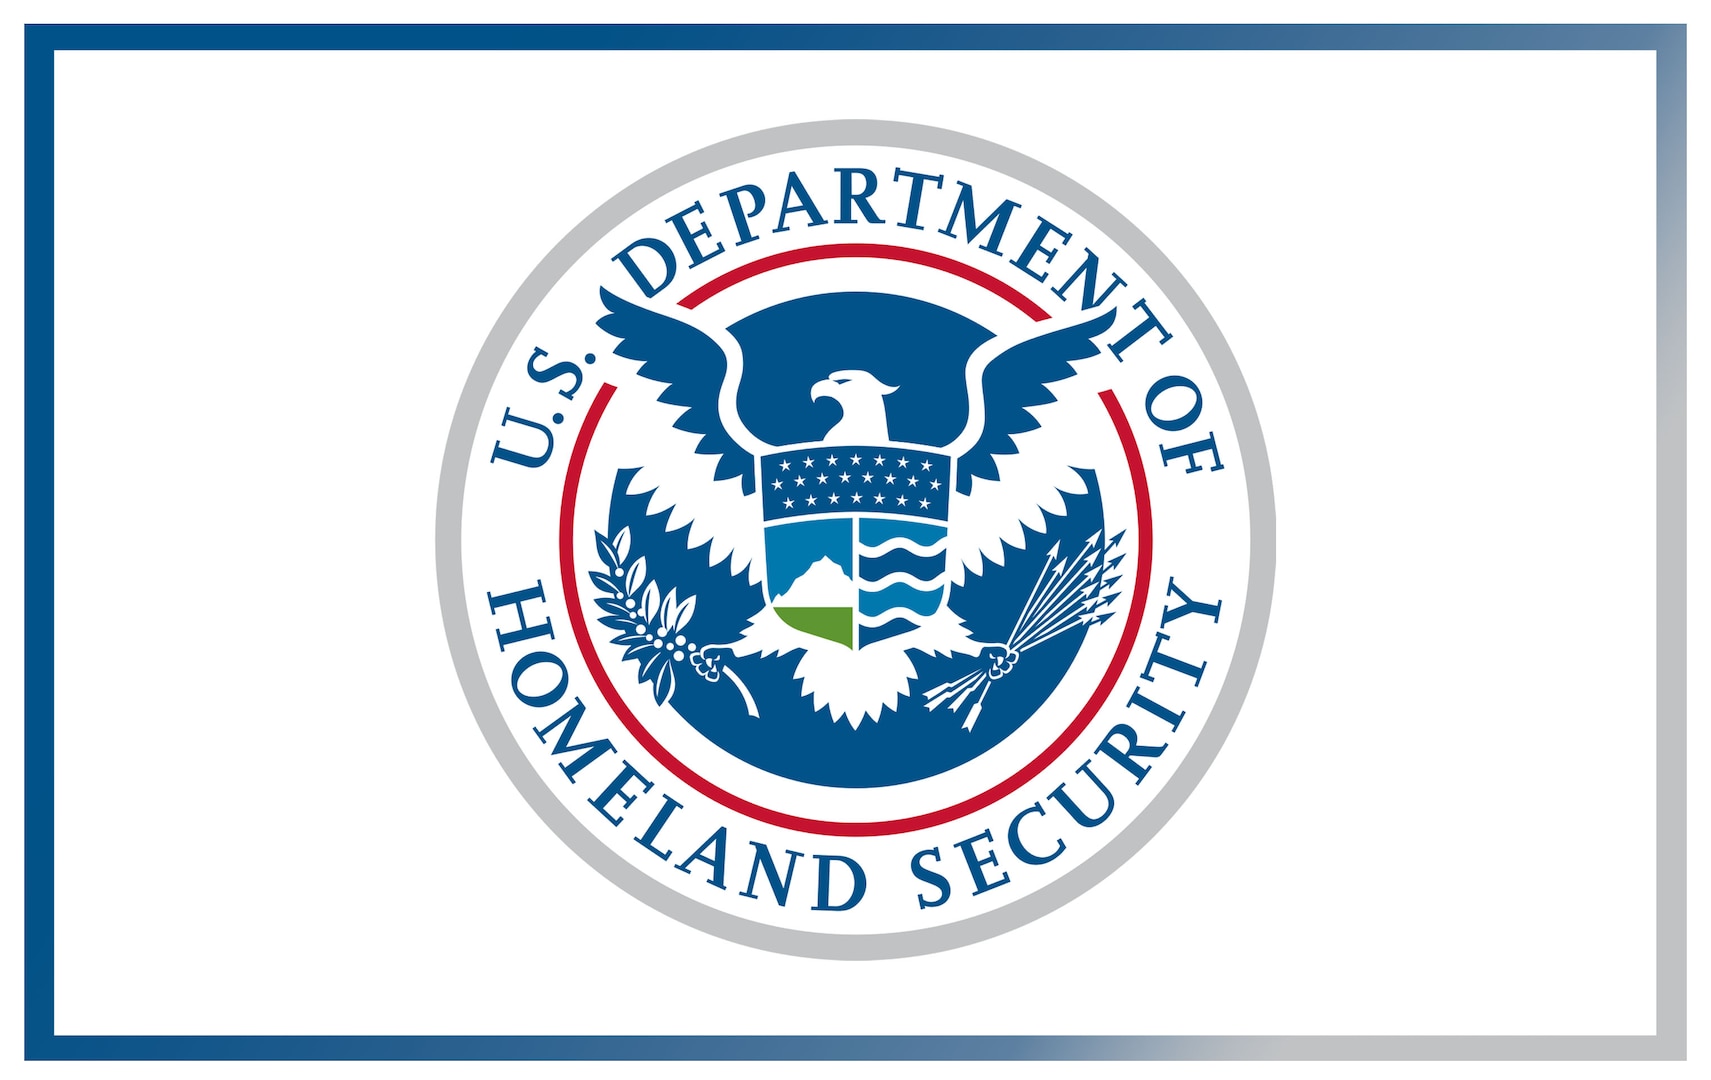 The DHS logo surrounded by a CG themed rectangular frame.